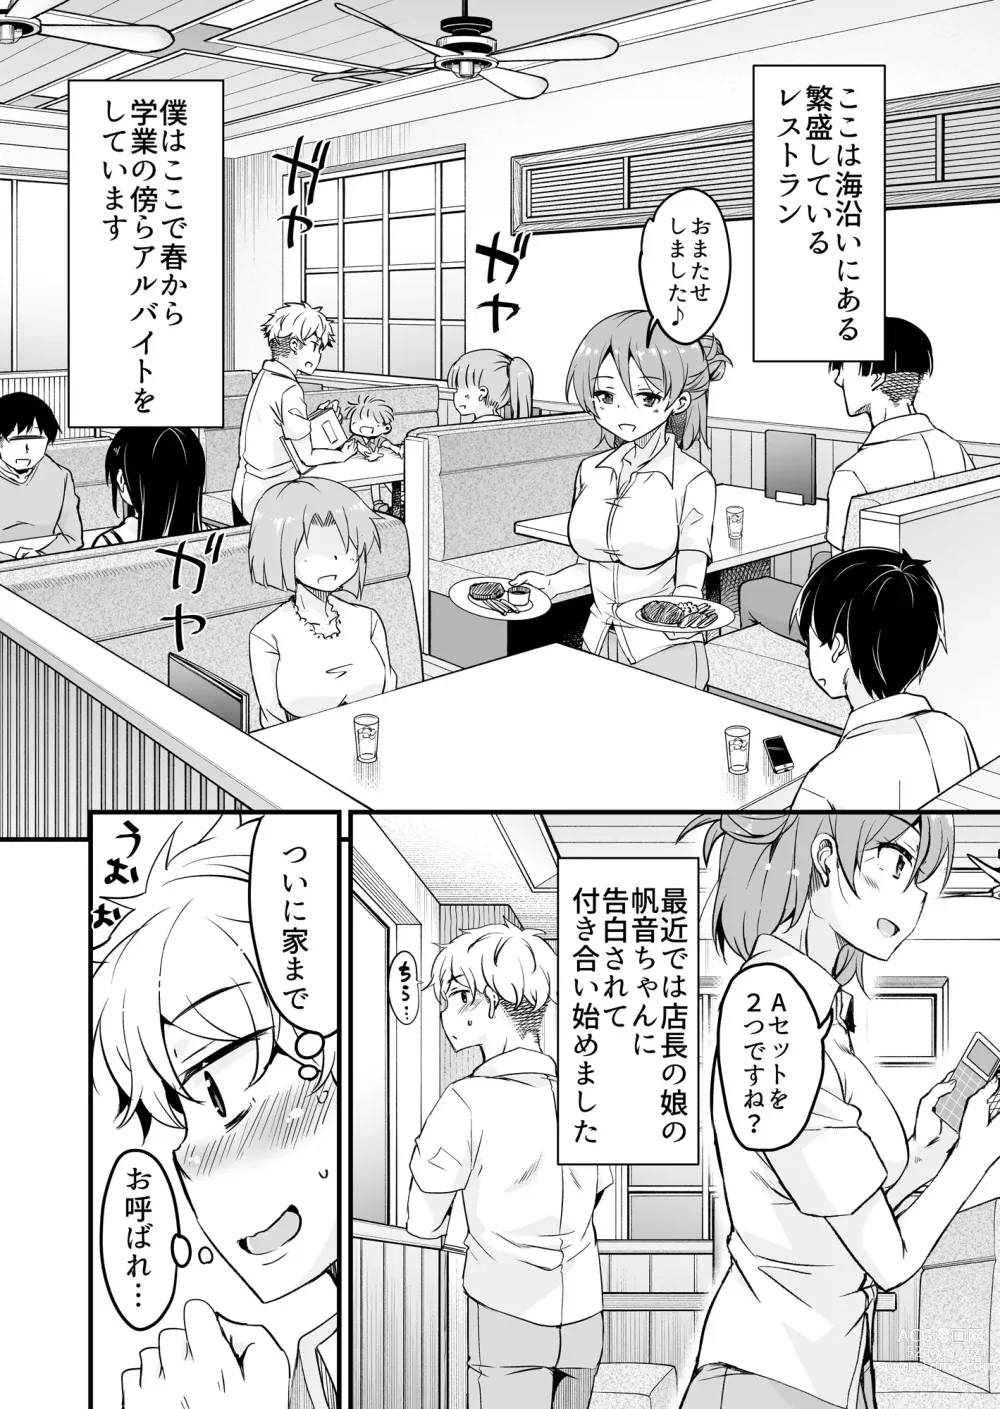 Page 8 of doujinshi 人妻店長〜娘の彼氏お借りします〜